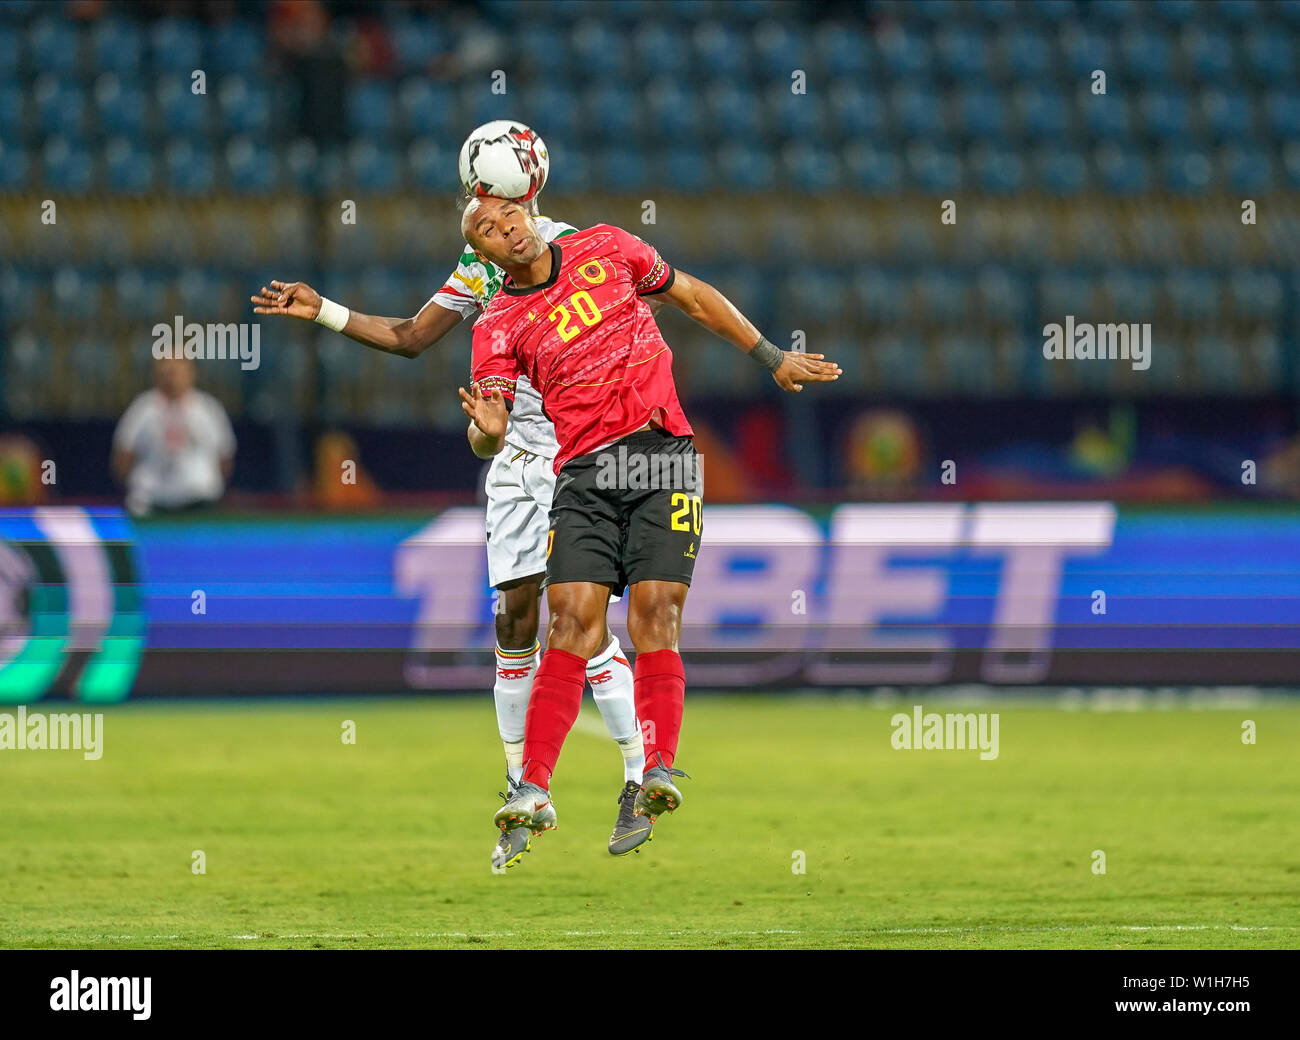 Ismailia, Egypt. 2nd July, 2019. Wilson Bruno Naval Da Costa Eduardo of Angola during the 2019 African Cup of Nations match between Angola and Mali at the Ismailia Stadium in Ismailia, Egypt. Ulrik Pedersen/CSM/Alamy Live News Stock Photo